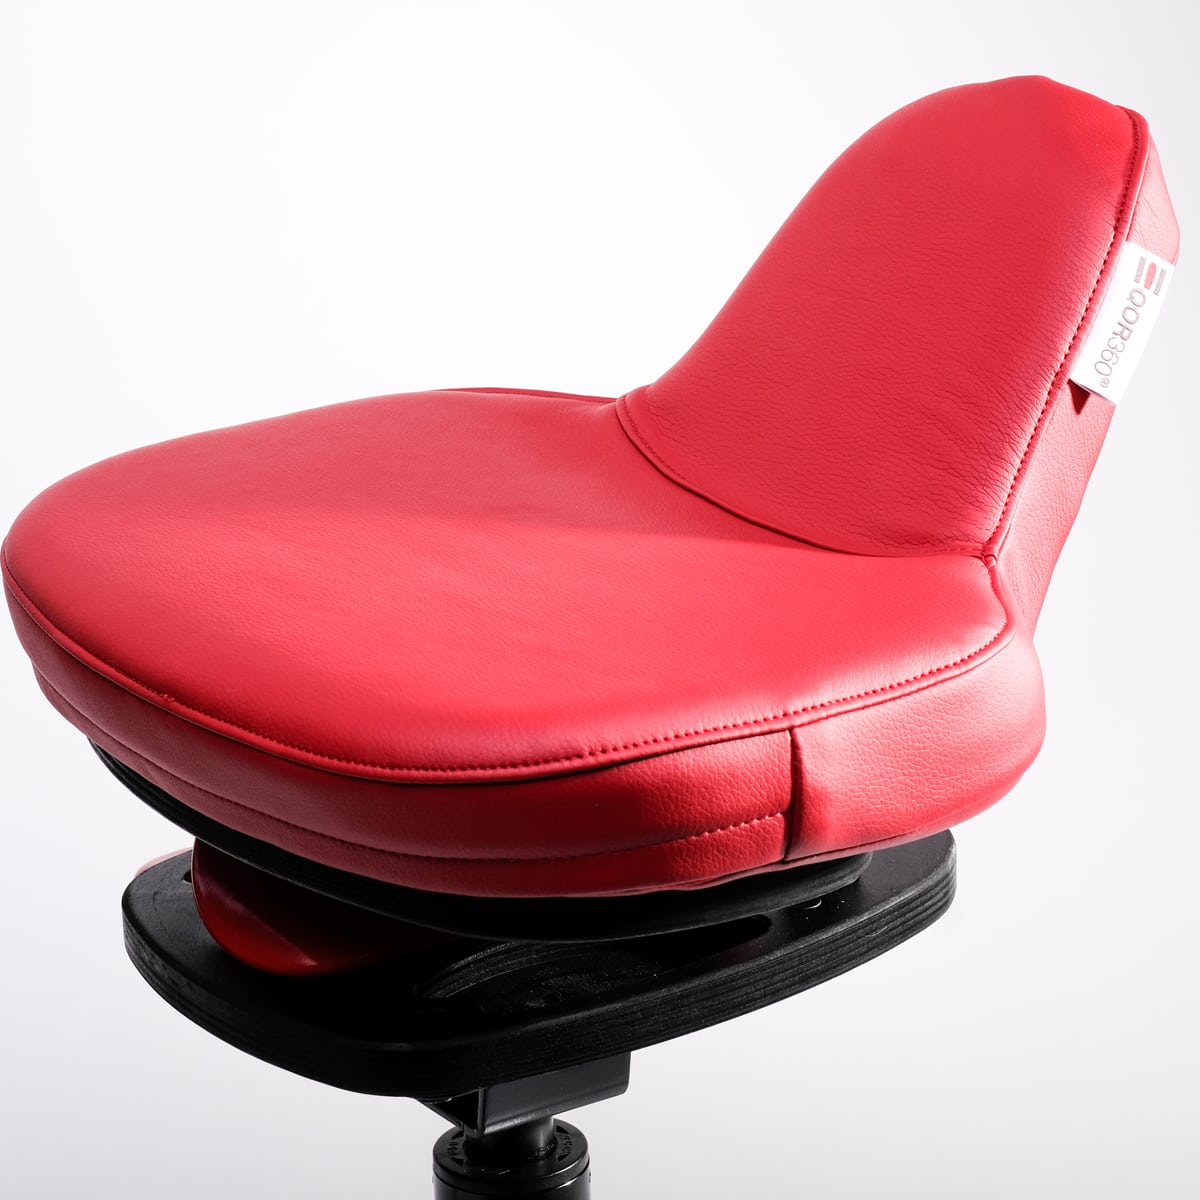 QOR360 red leather seat active chair